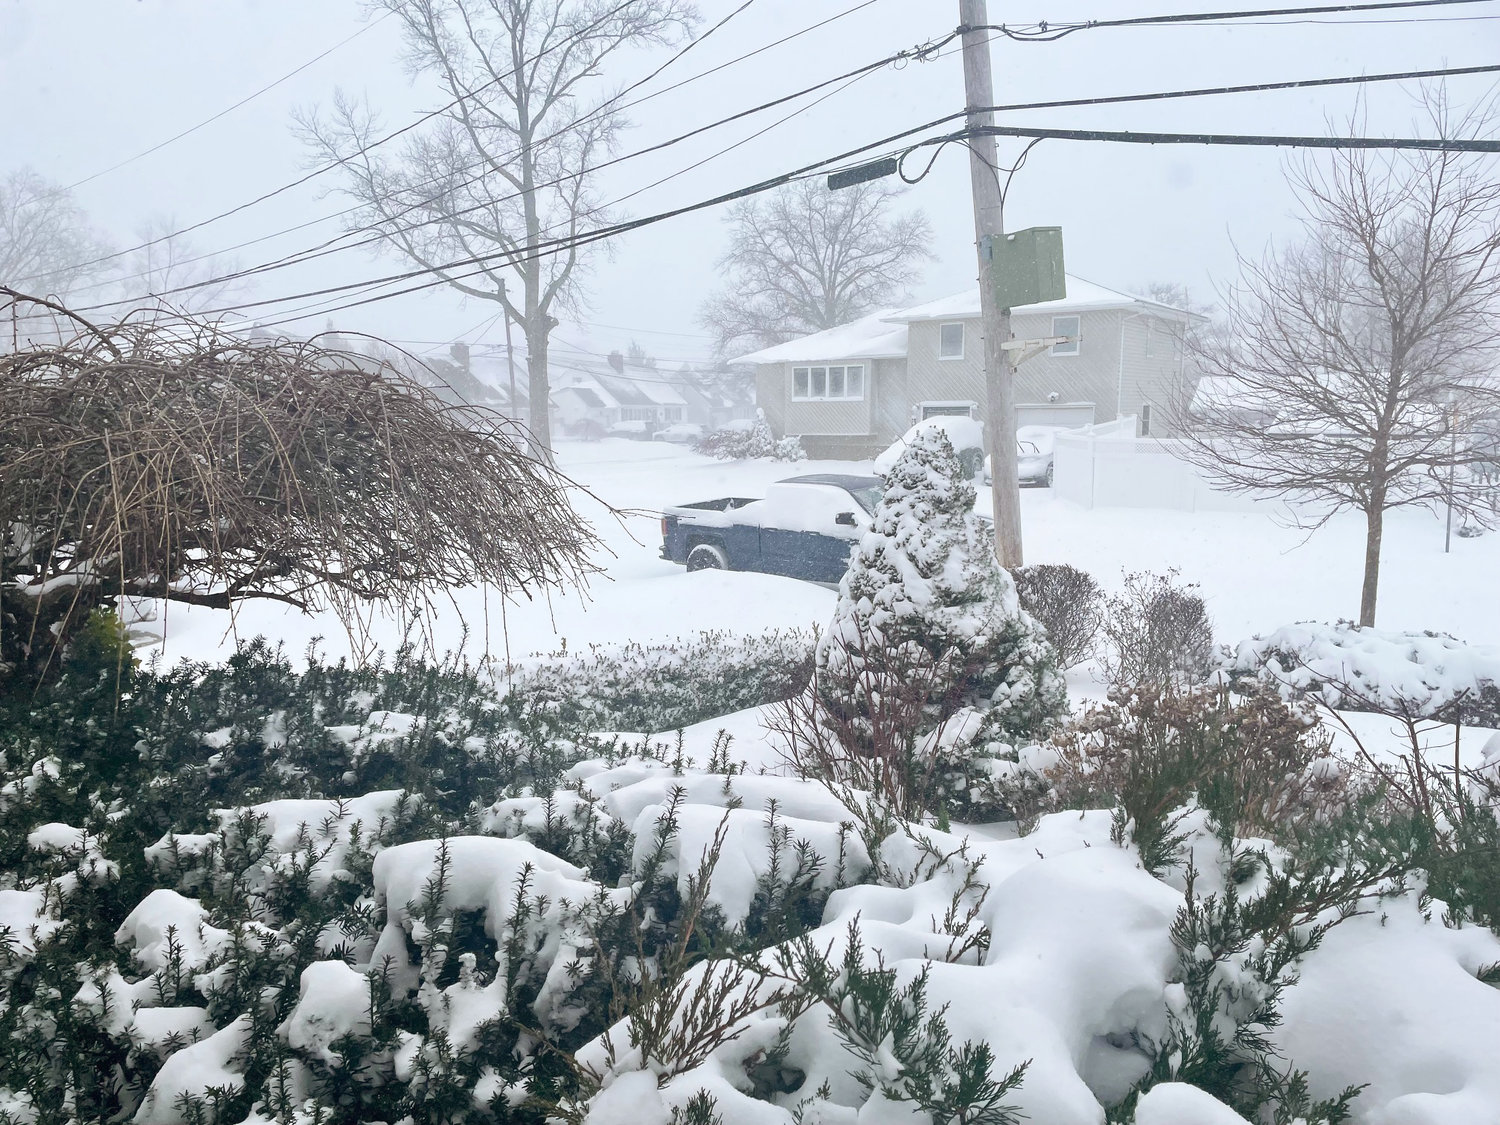 A view of south Merrick amid a nor'easter that slammed into Nassau County Friday night into Saturday.